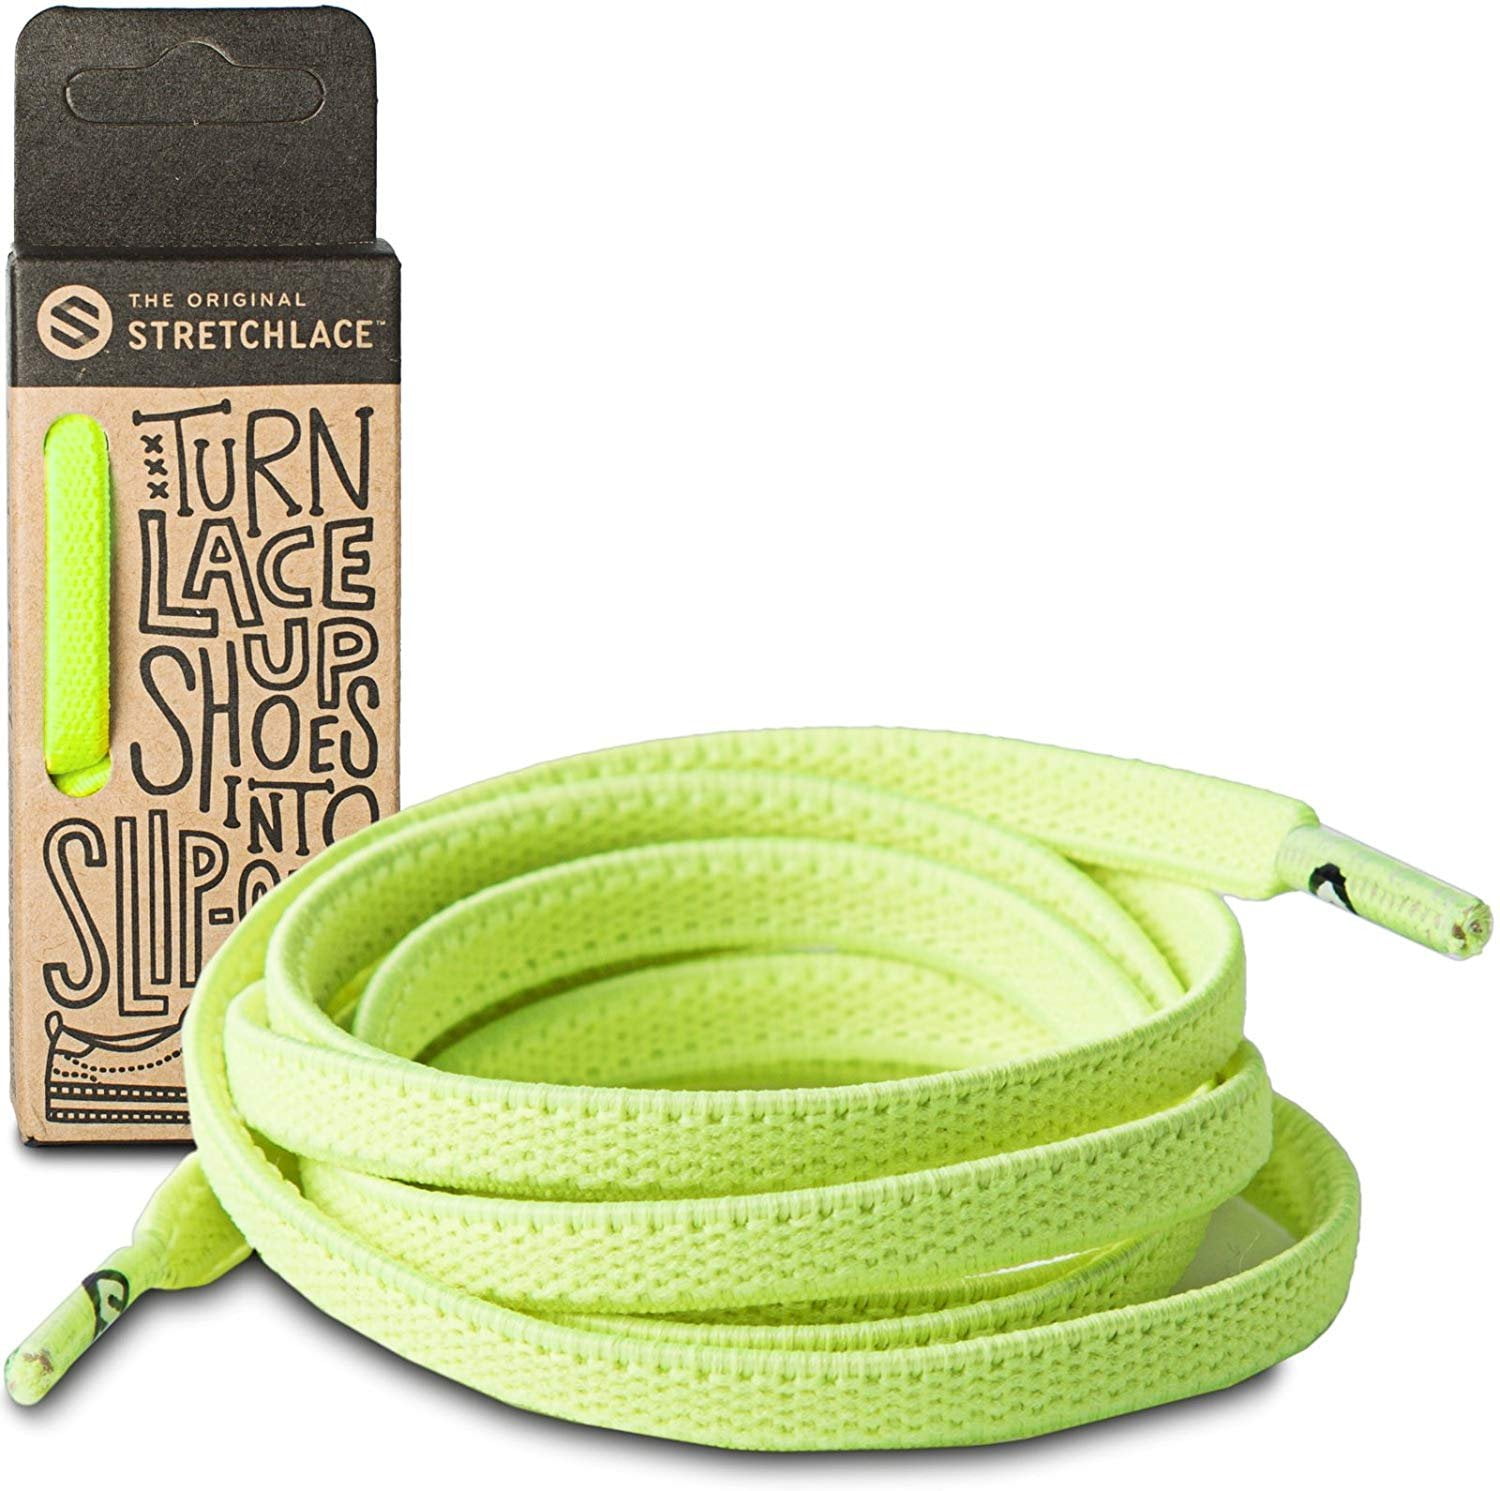 NWT Z-coil Shoe Laces 60 Inch Length  Lime Green & Black 